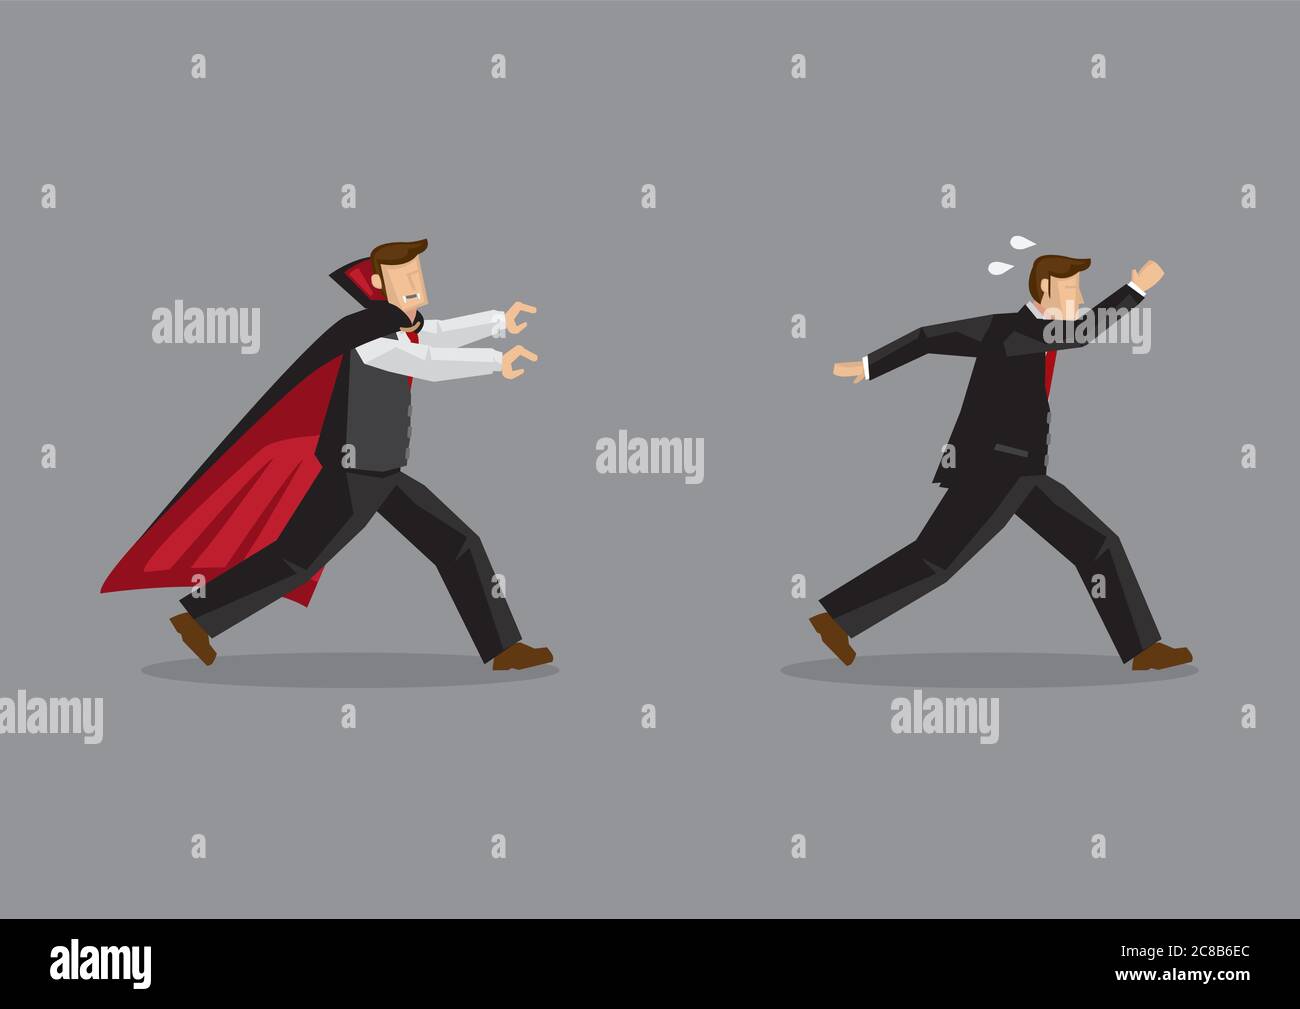 Funny scene of frightened man running away from a vampire hungry for blood. Creative vector illustration isolated on grey background. Stock Vector